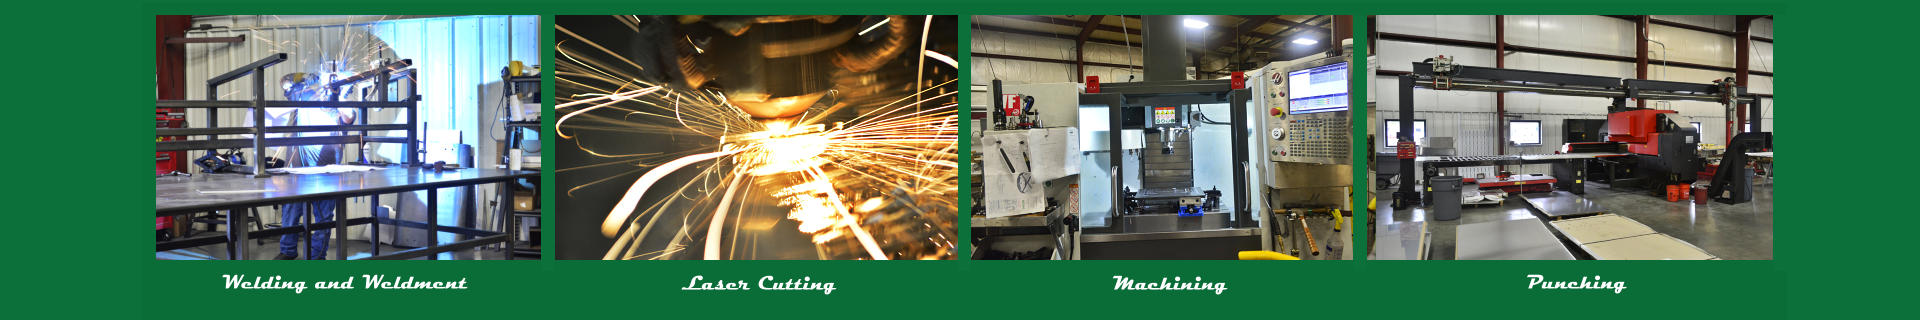 Laser Cutting Machining Punching Welding and Weldment